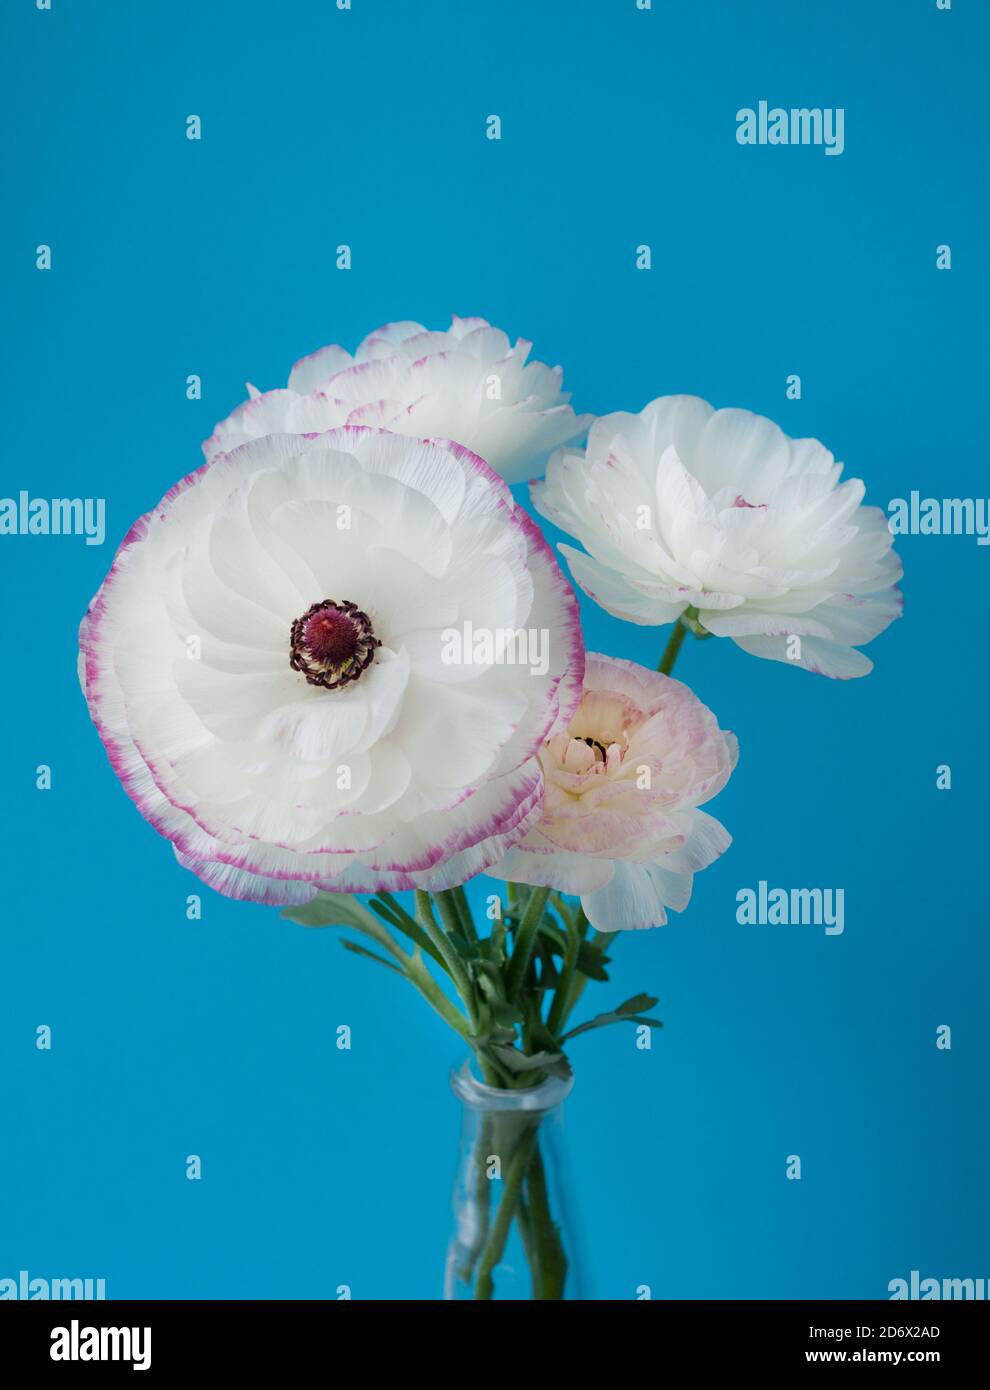 Beautiful bouquet of white ranunculus flowers with pink edging on a blue background. Flowers and buds Stock Photo